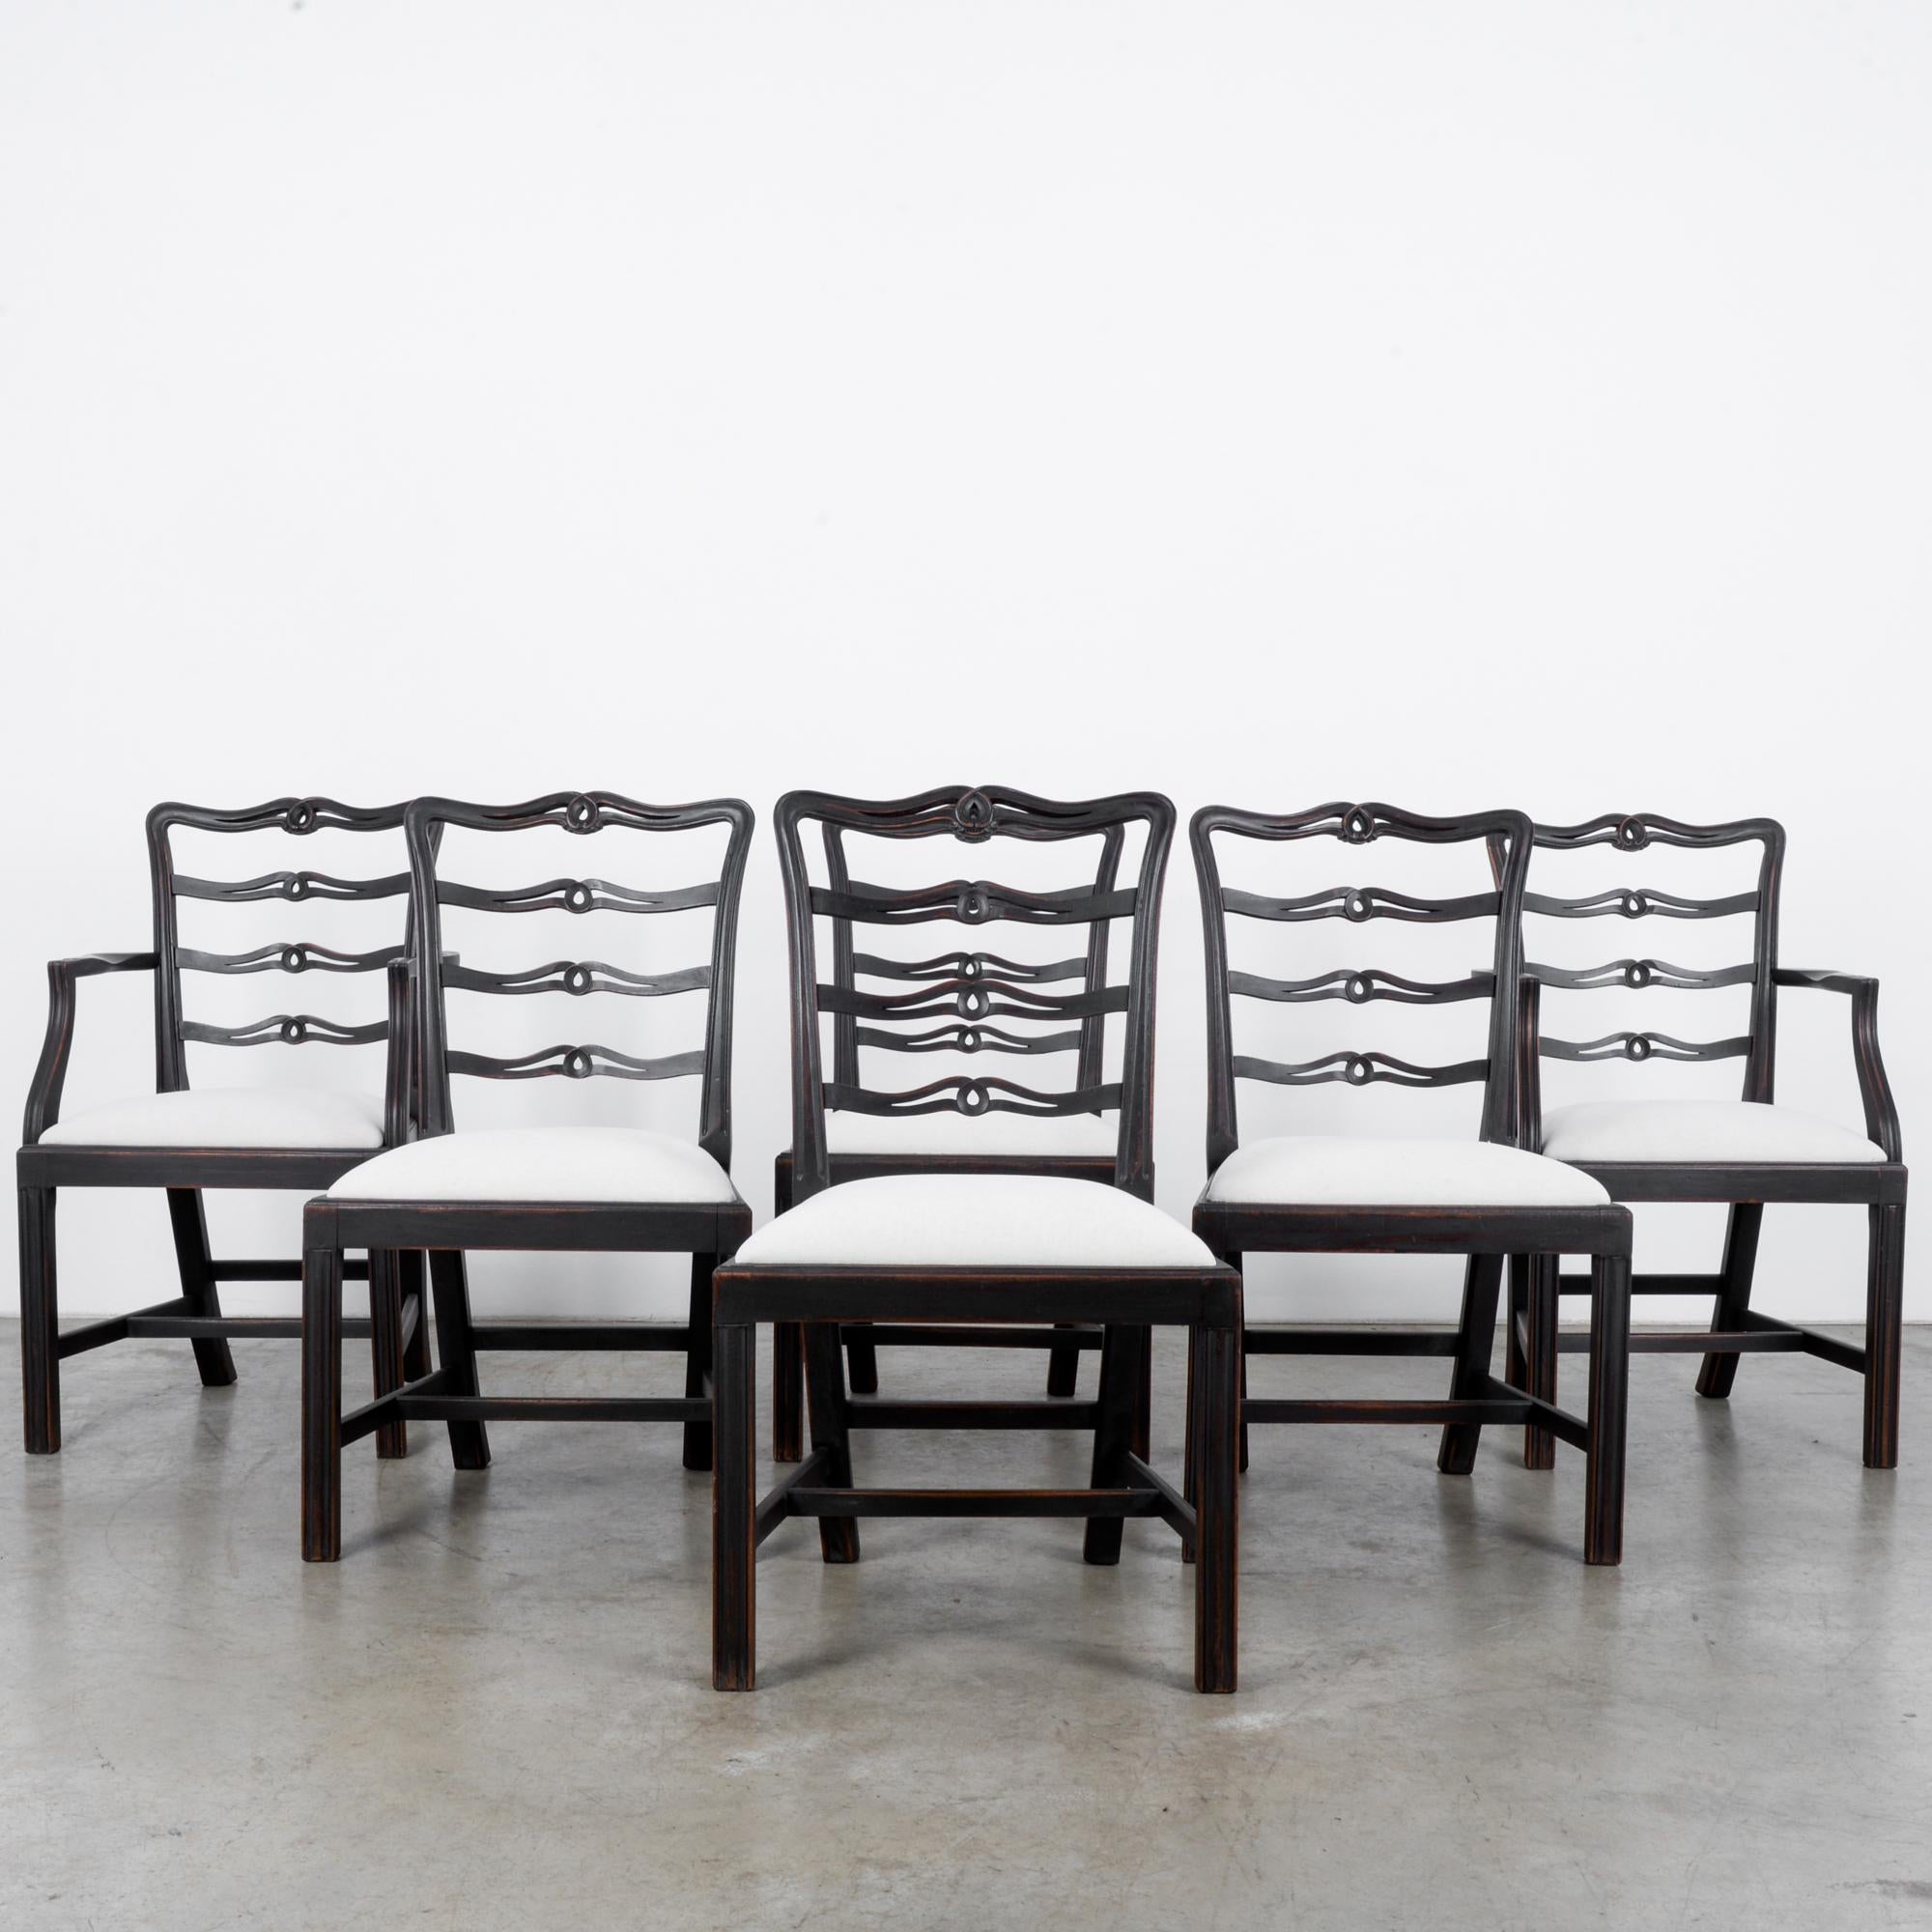 This set of six wooden chairs was made in the United Kingdom, circa 1920. The pure white upholstered seats complement the rich and warm umber shade of the wood. Carved top rails and ridges on the wooden frames show the meticulous craftsmanship